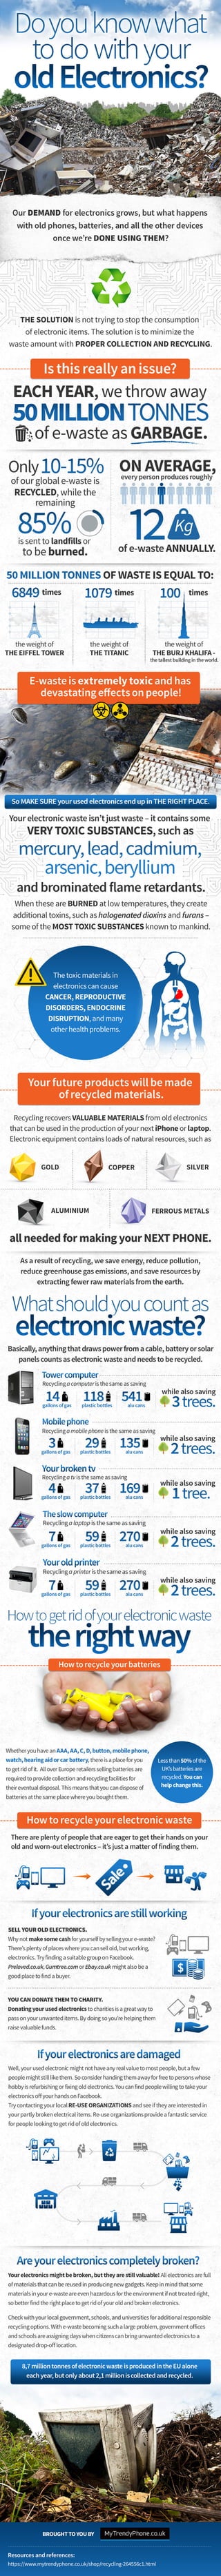 Do you know what to do with your electronics?